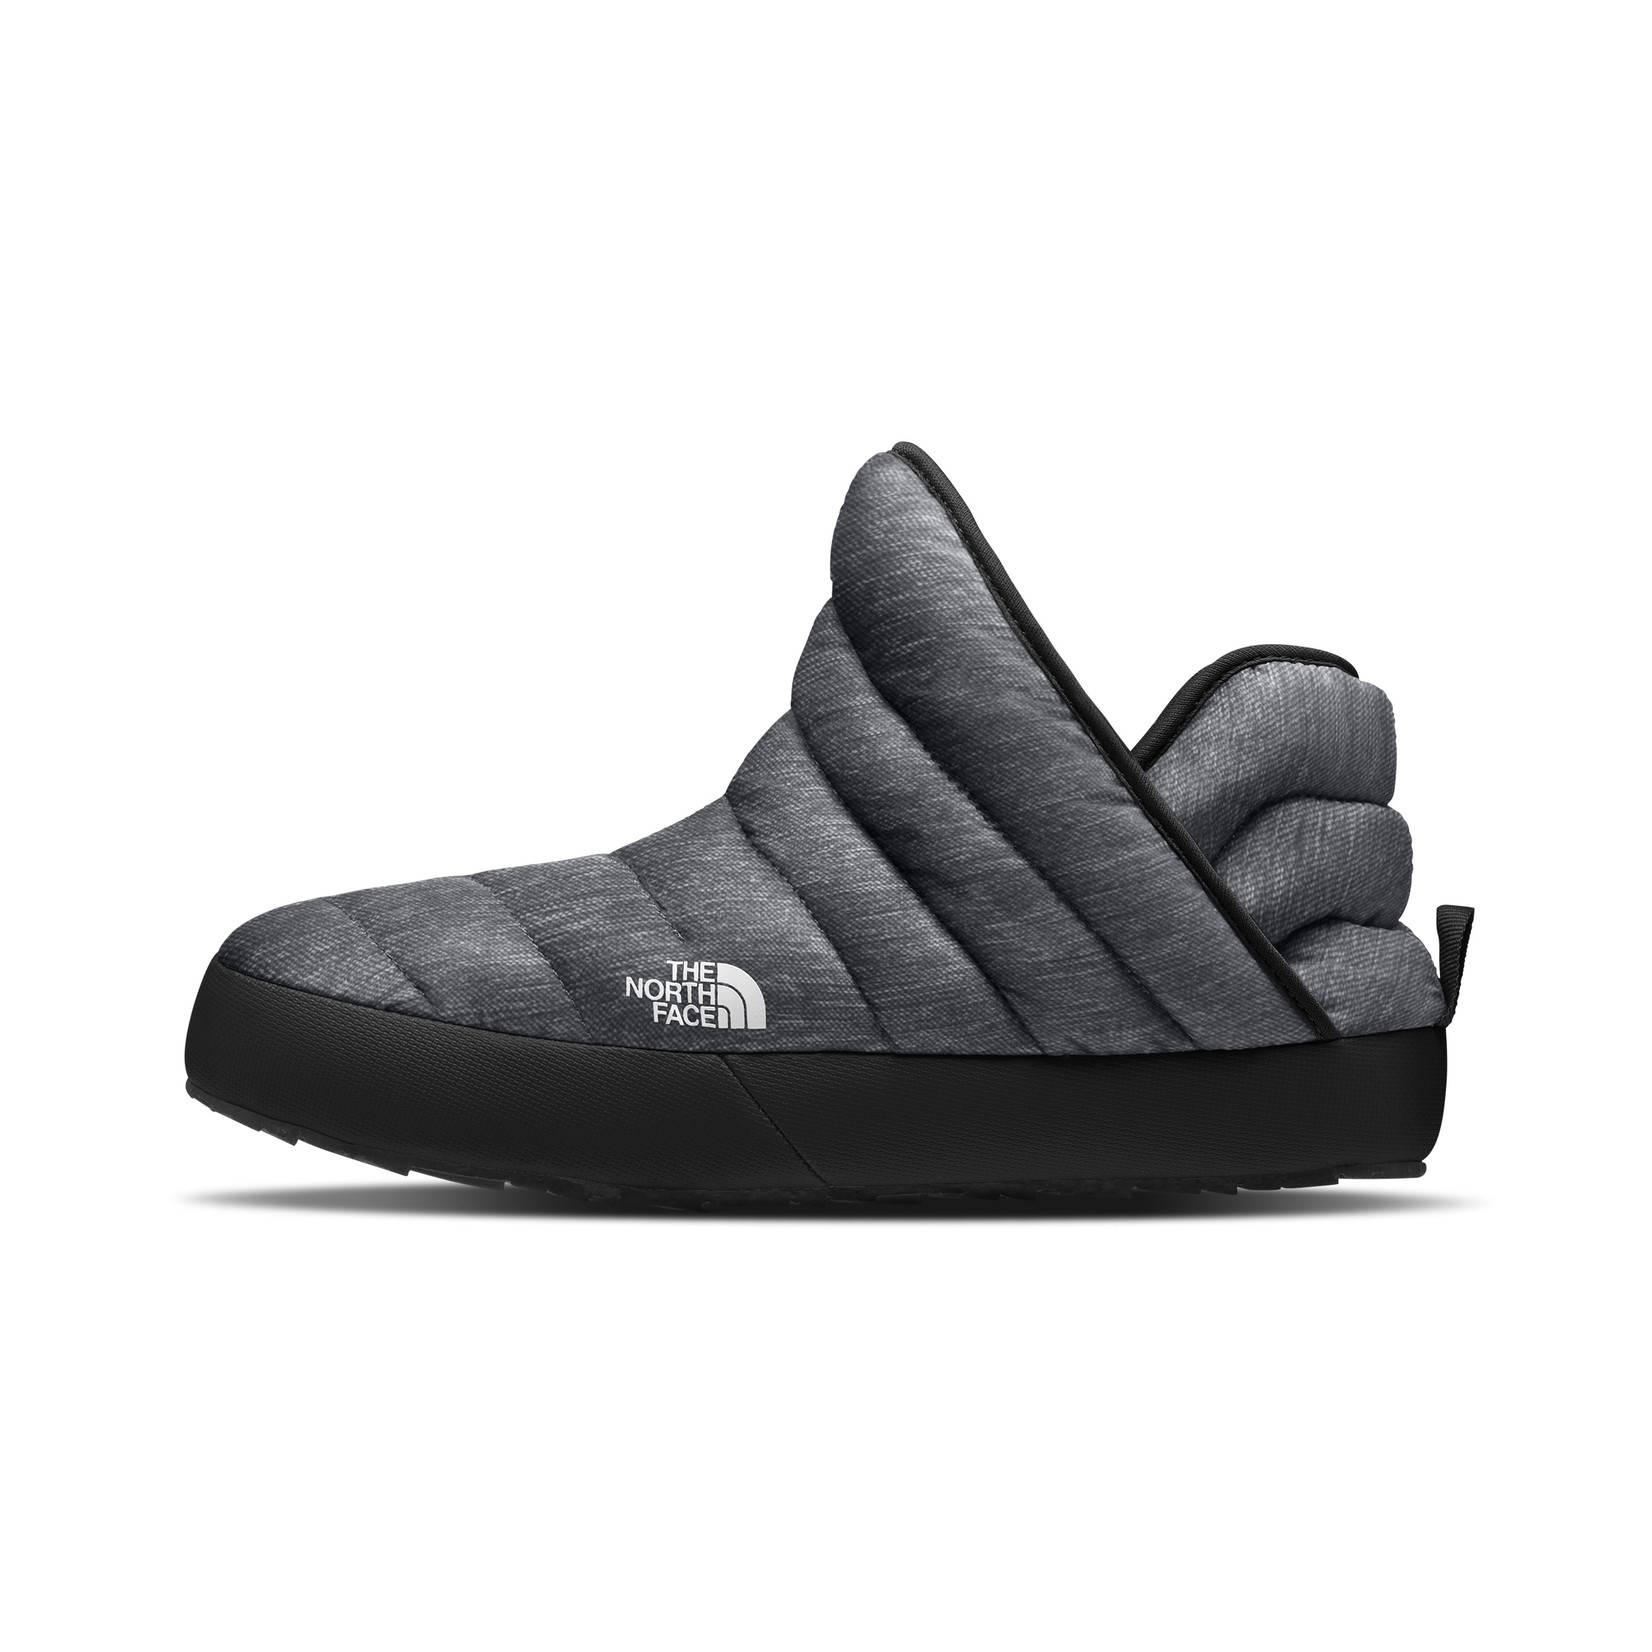 The North Face The North Face Women's Thermoball Traction Booties